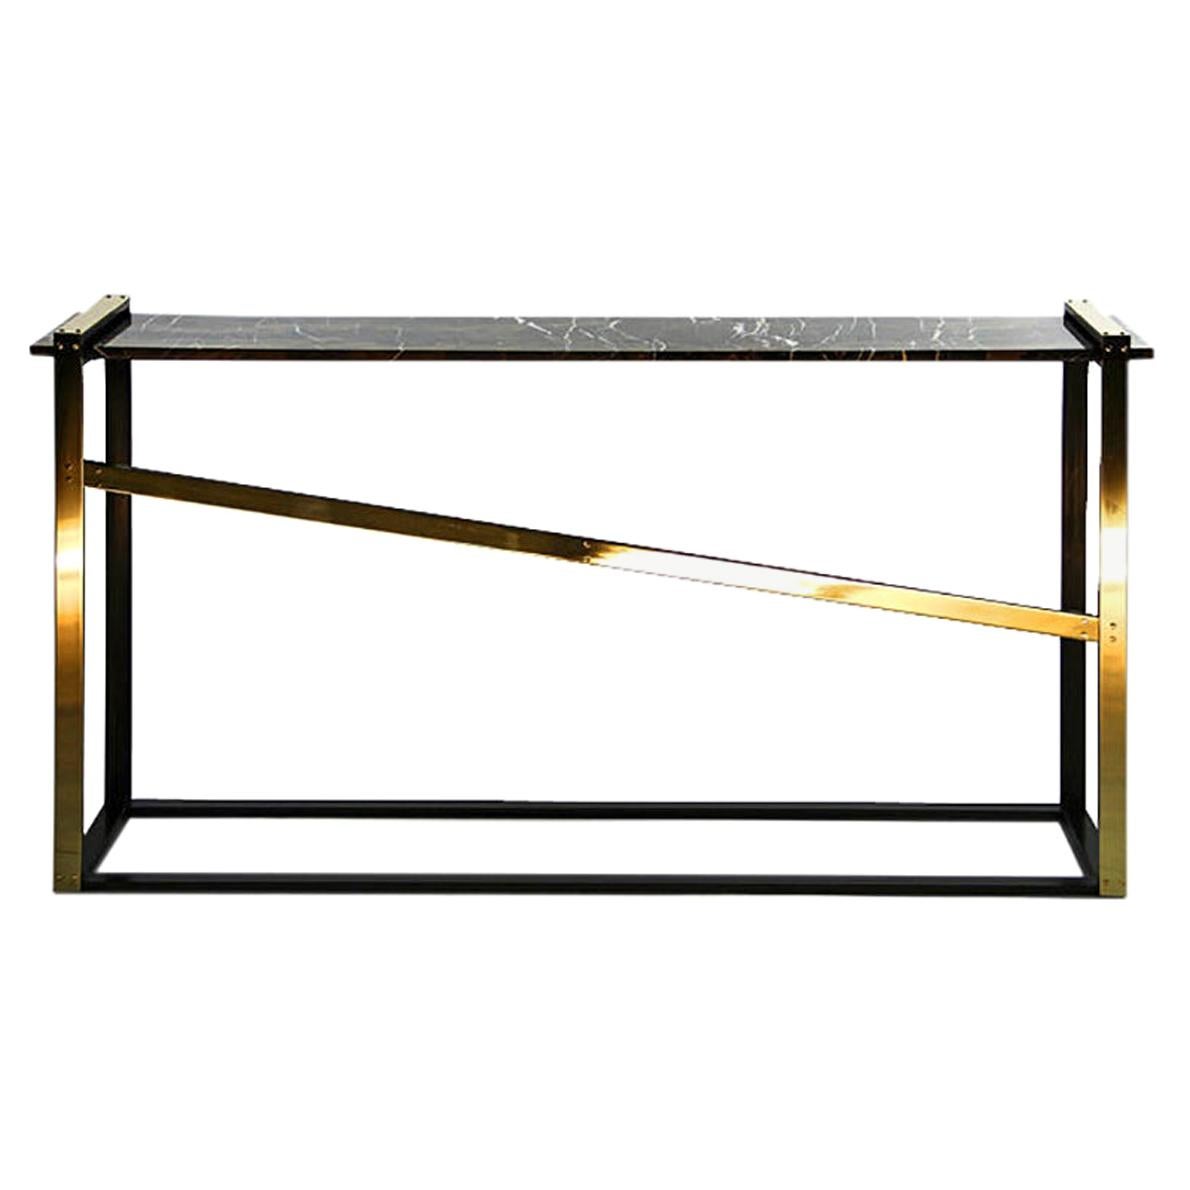 Robert Console Table in Blackened Steel, Saint Laurent Marble and Brass Accents